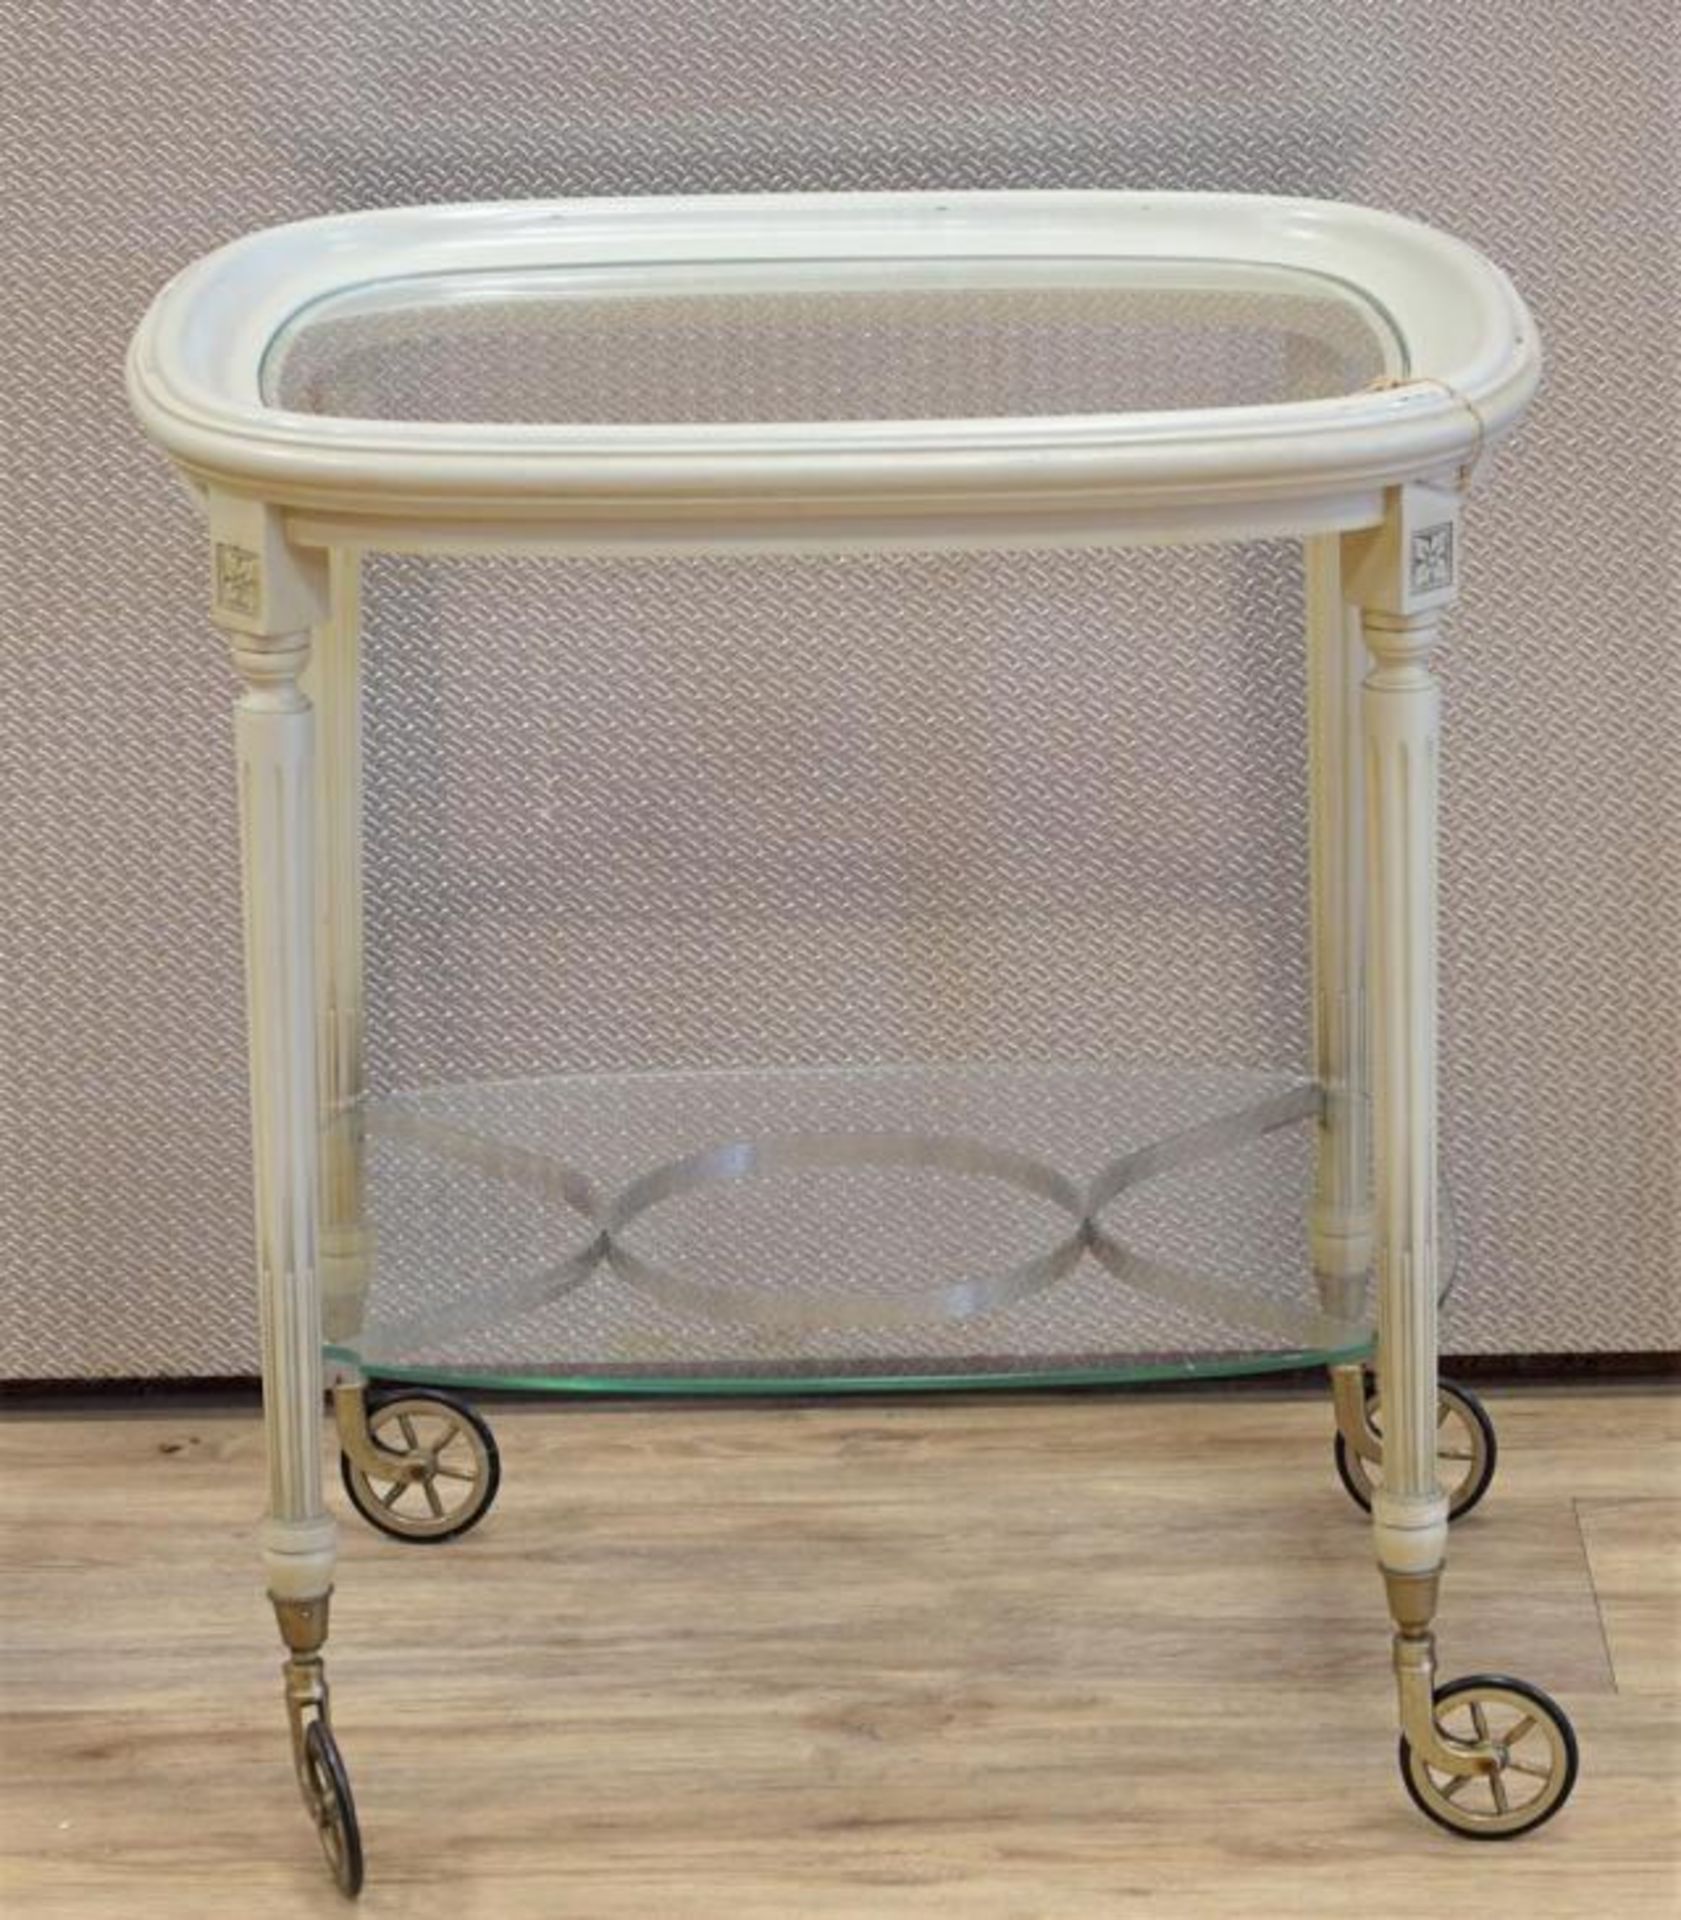 Serving table with glass top, dim. 64 x 61 x 48 cm.